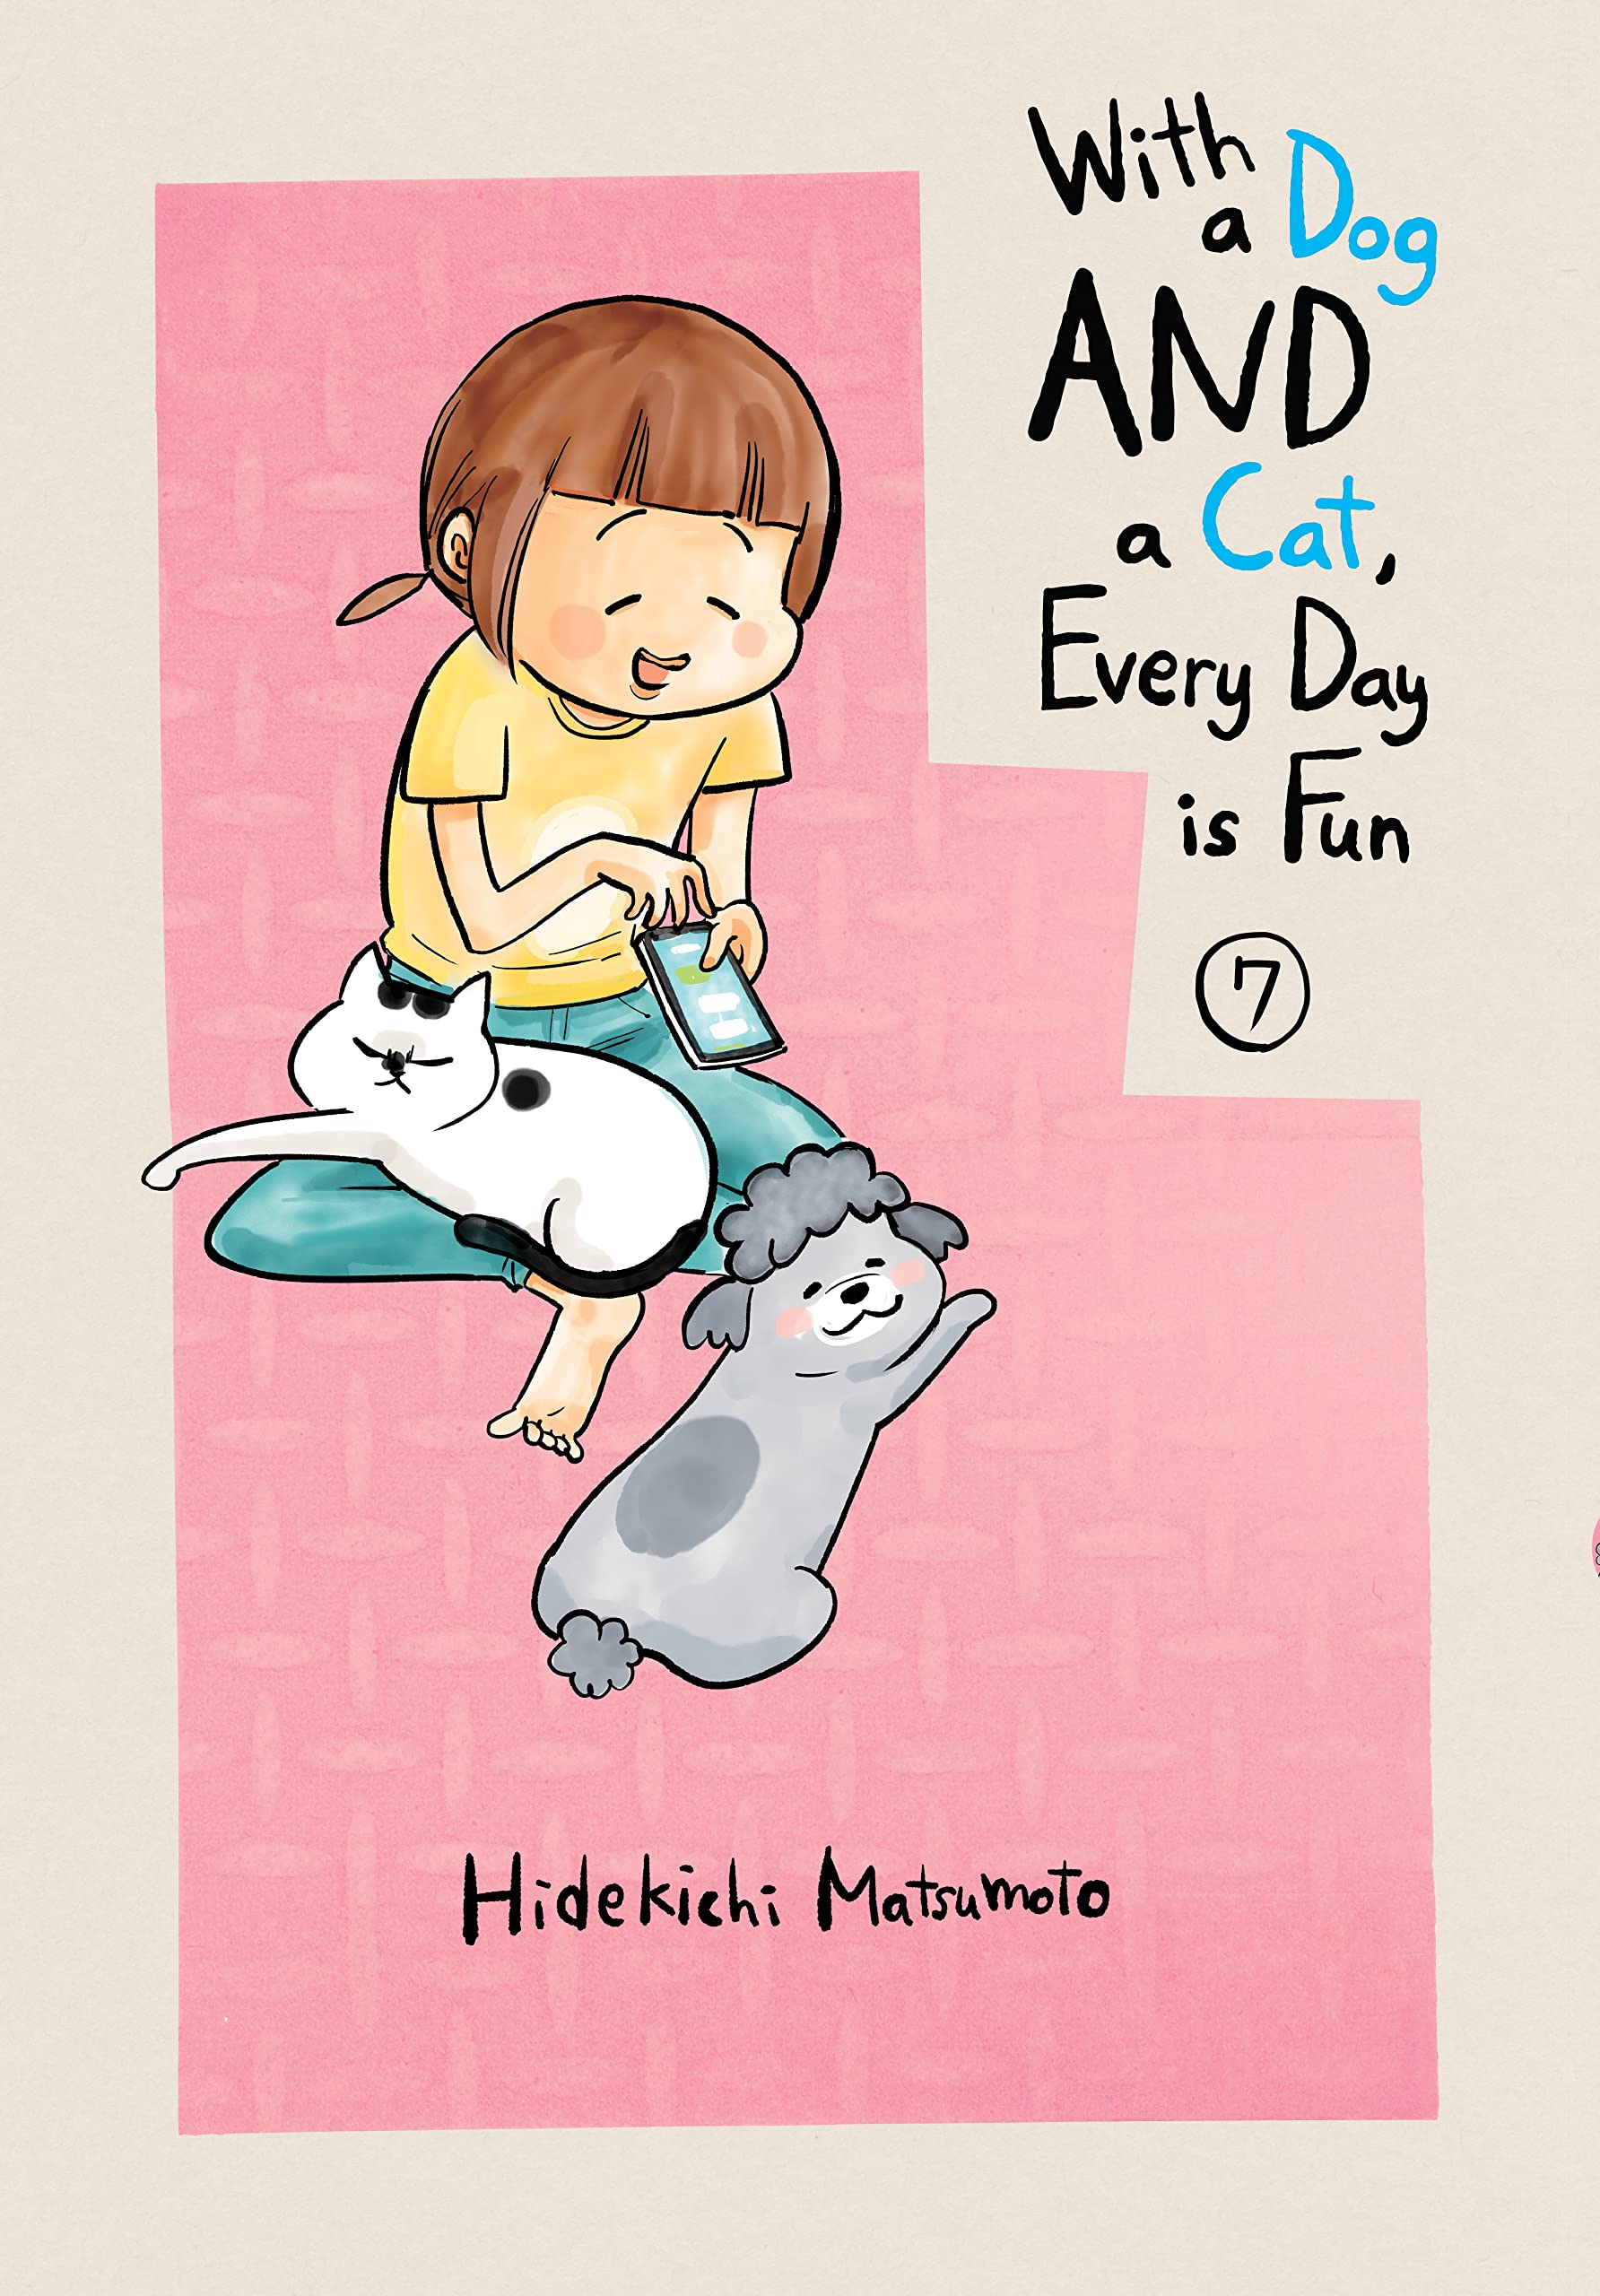 With a Dog and a Cat, Every Day is Fun Volume 7 Graphic Novel